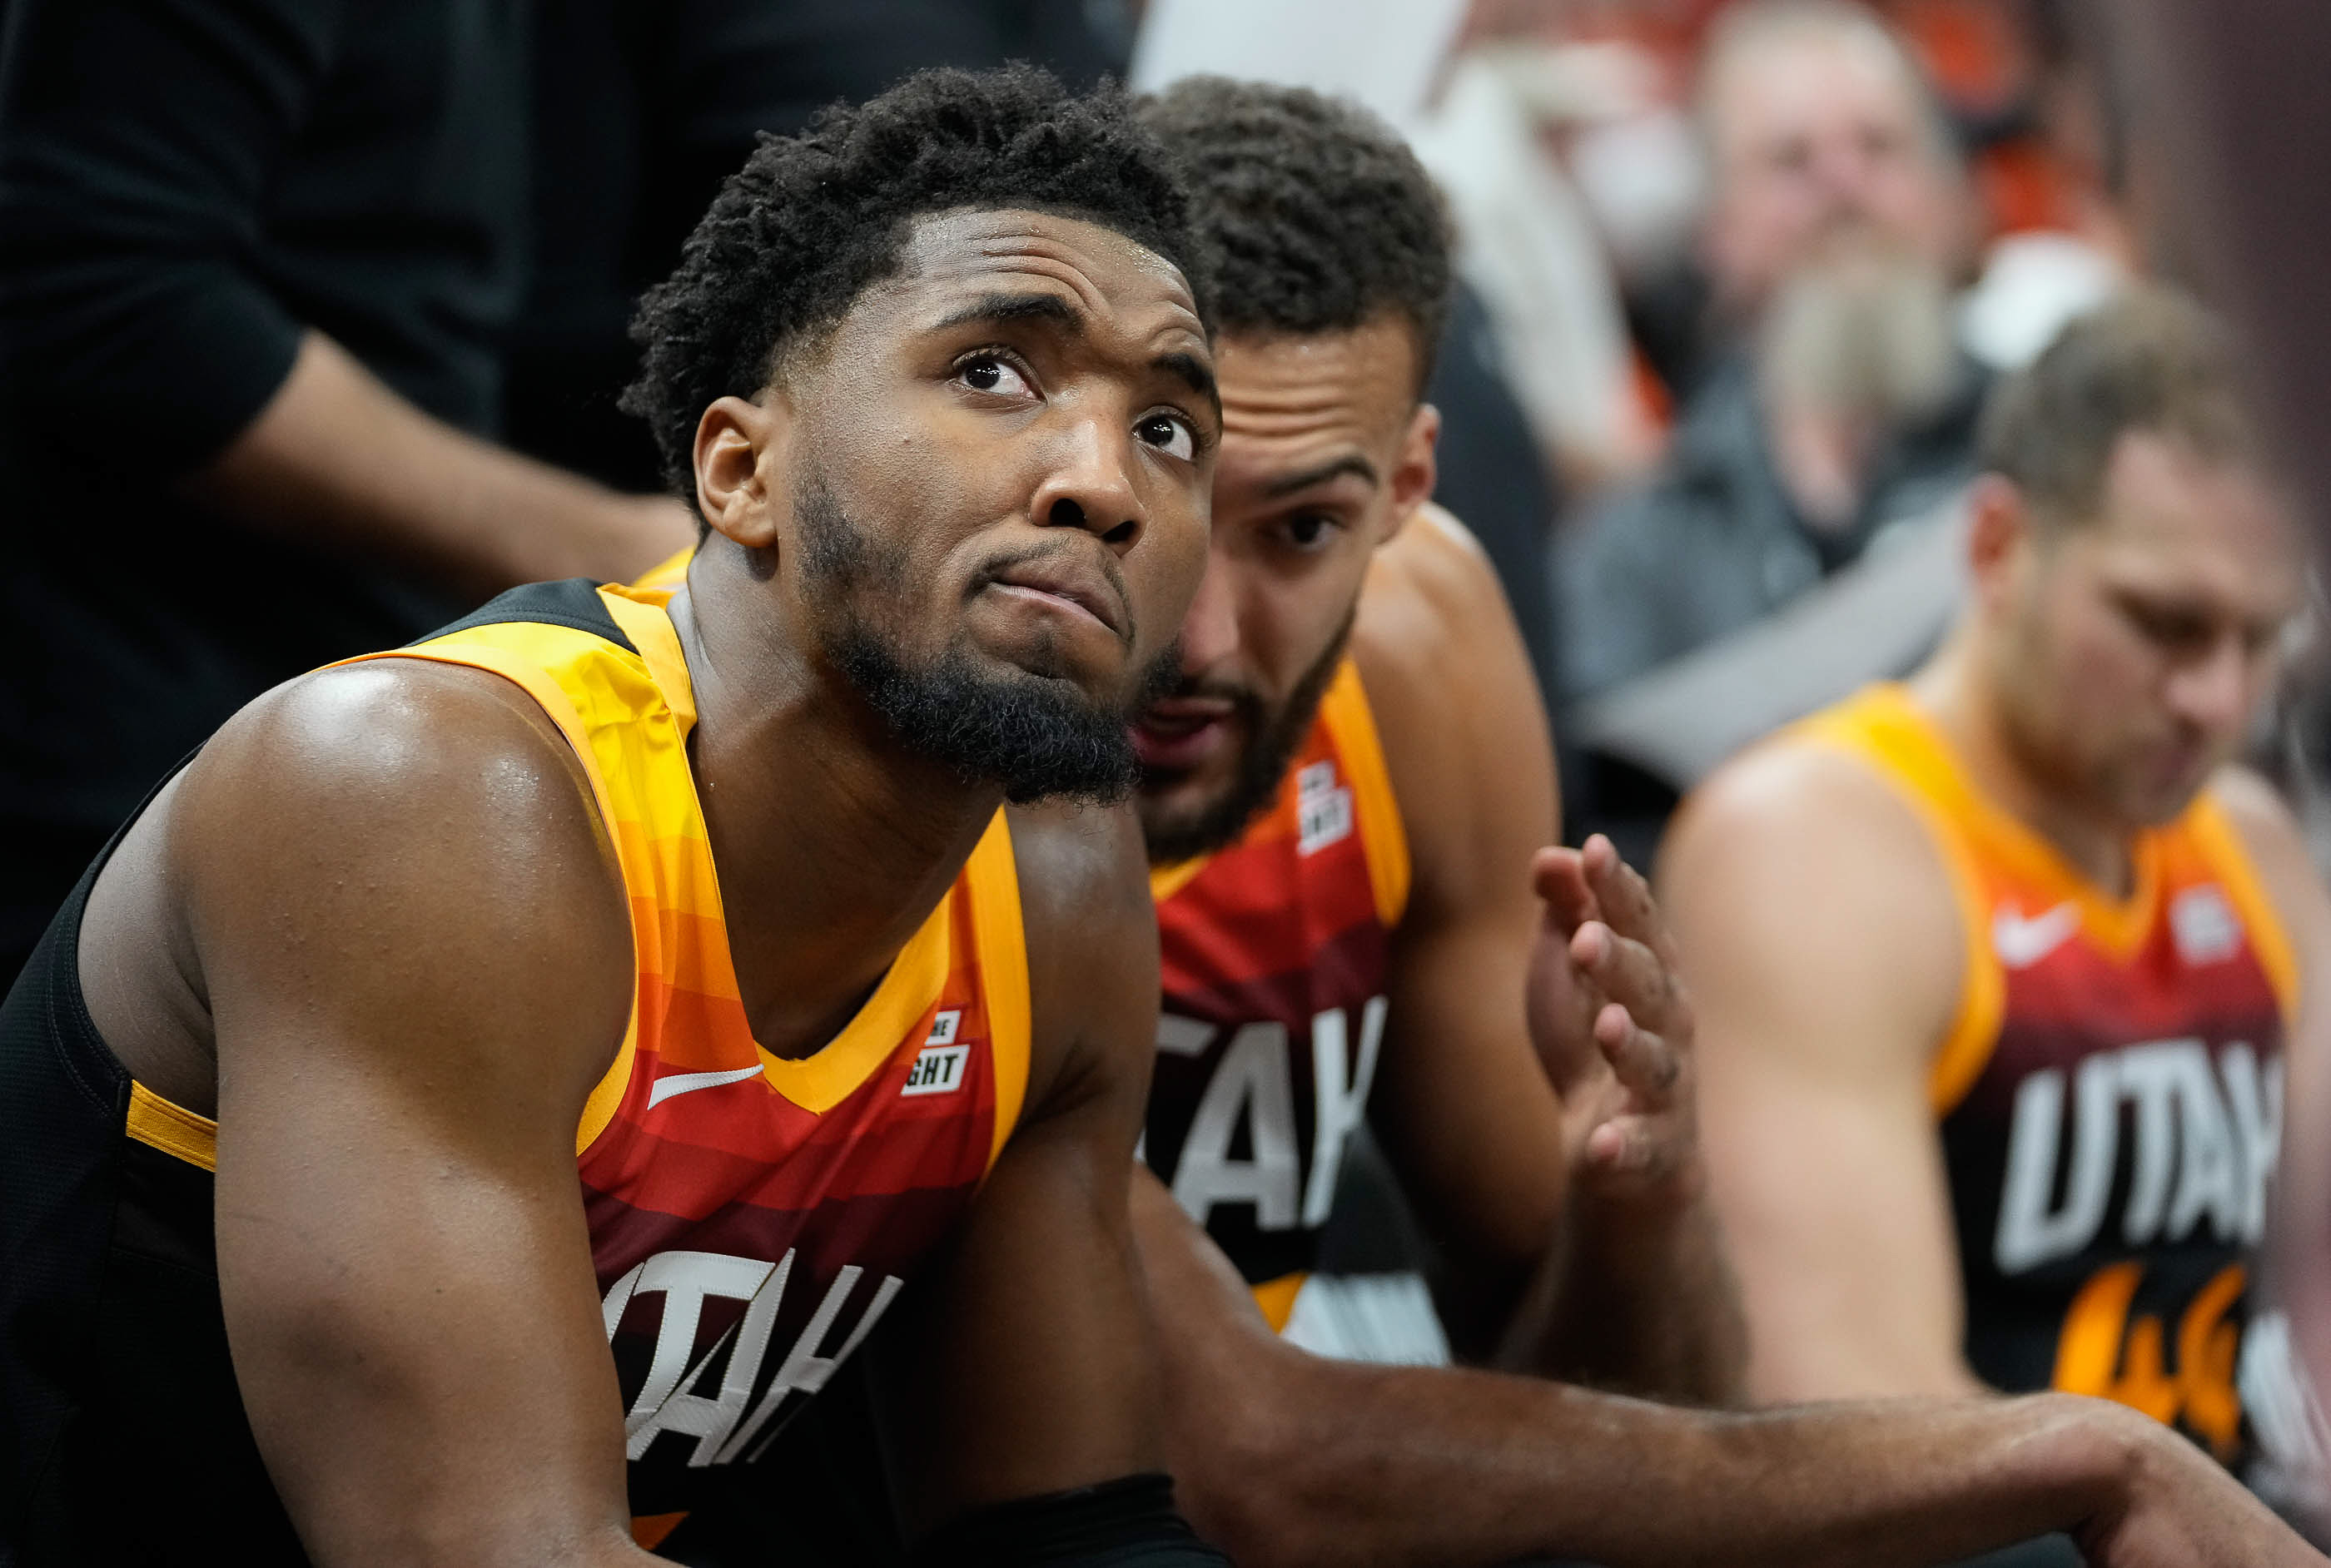 Donovan Mitchell on being traded from the Utah Jazz: “I look at it as a  win-win”